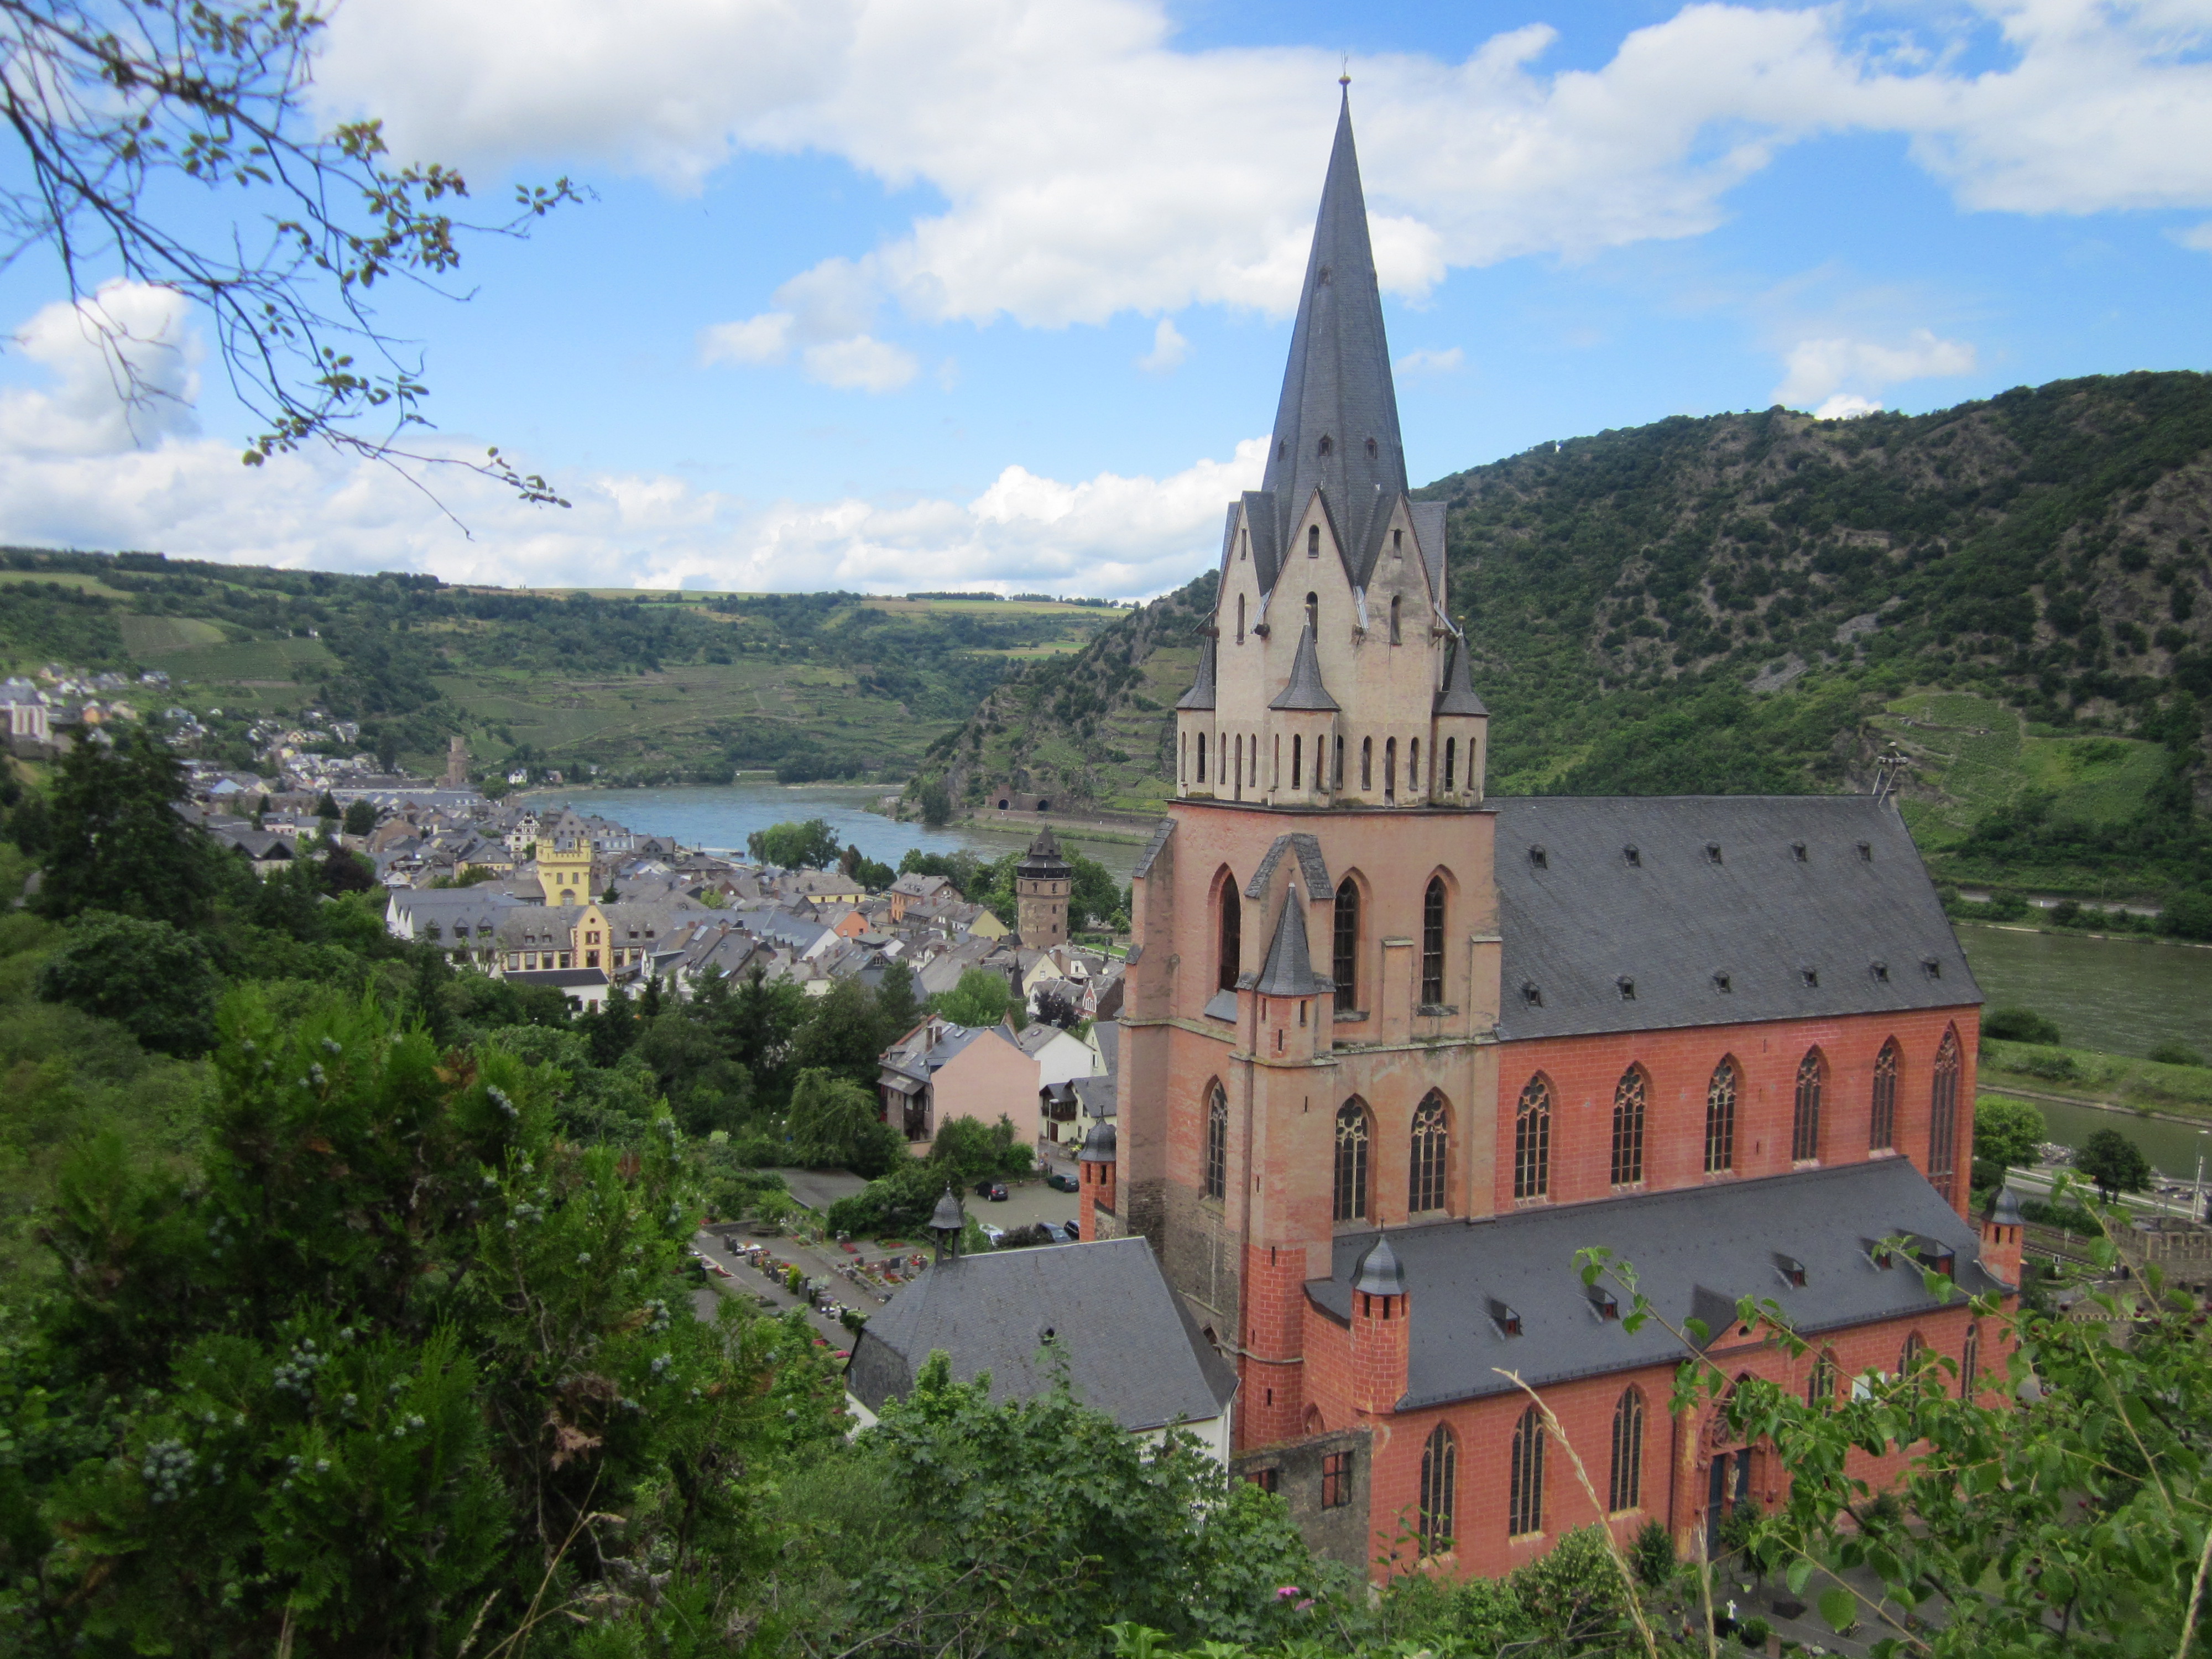 The town of oberwesel, germany photo